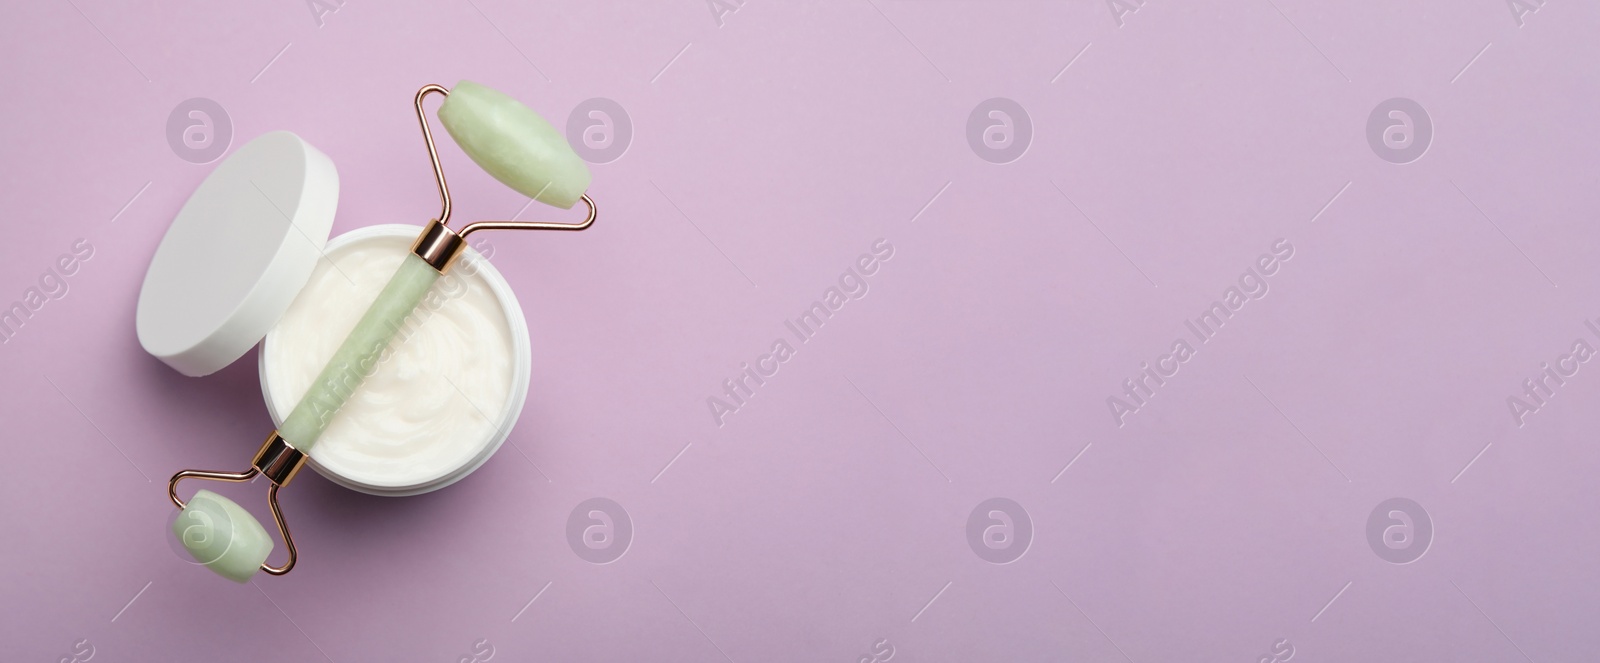 Image of Natural face roller and cosmetic product on lilac background, top view with space for text. Banner design